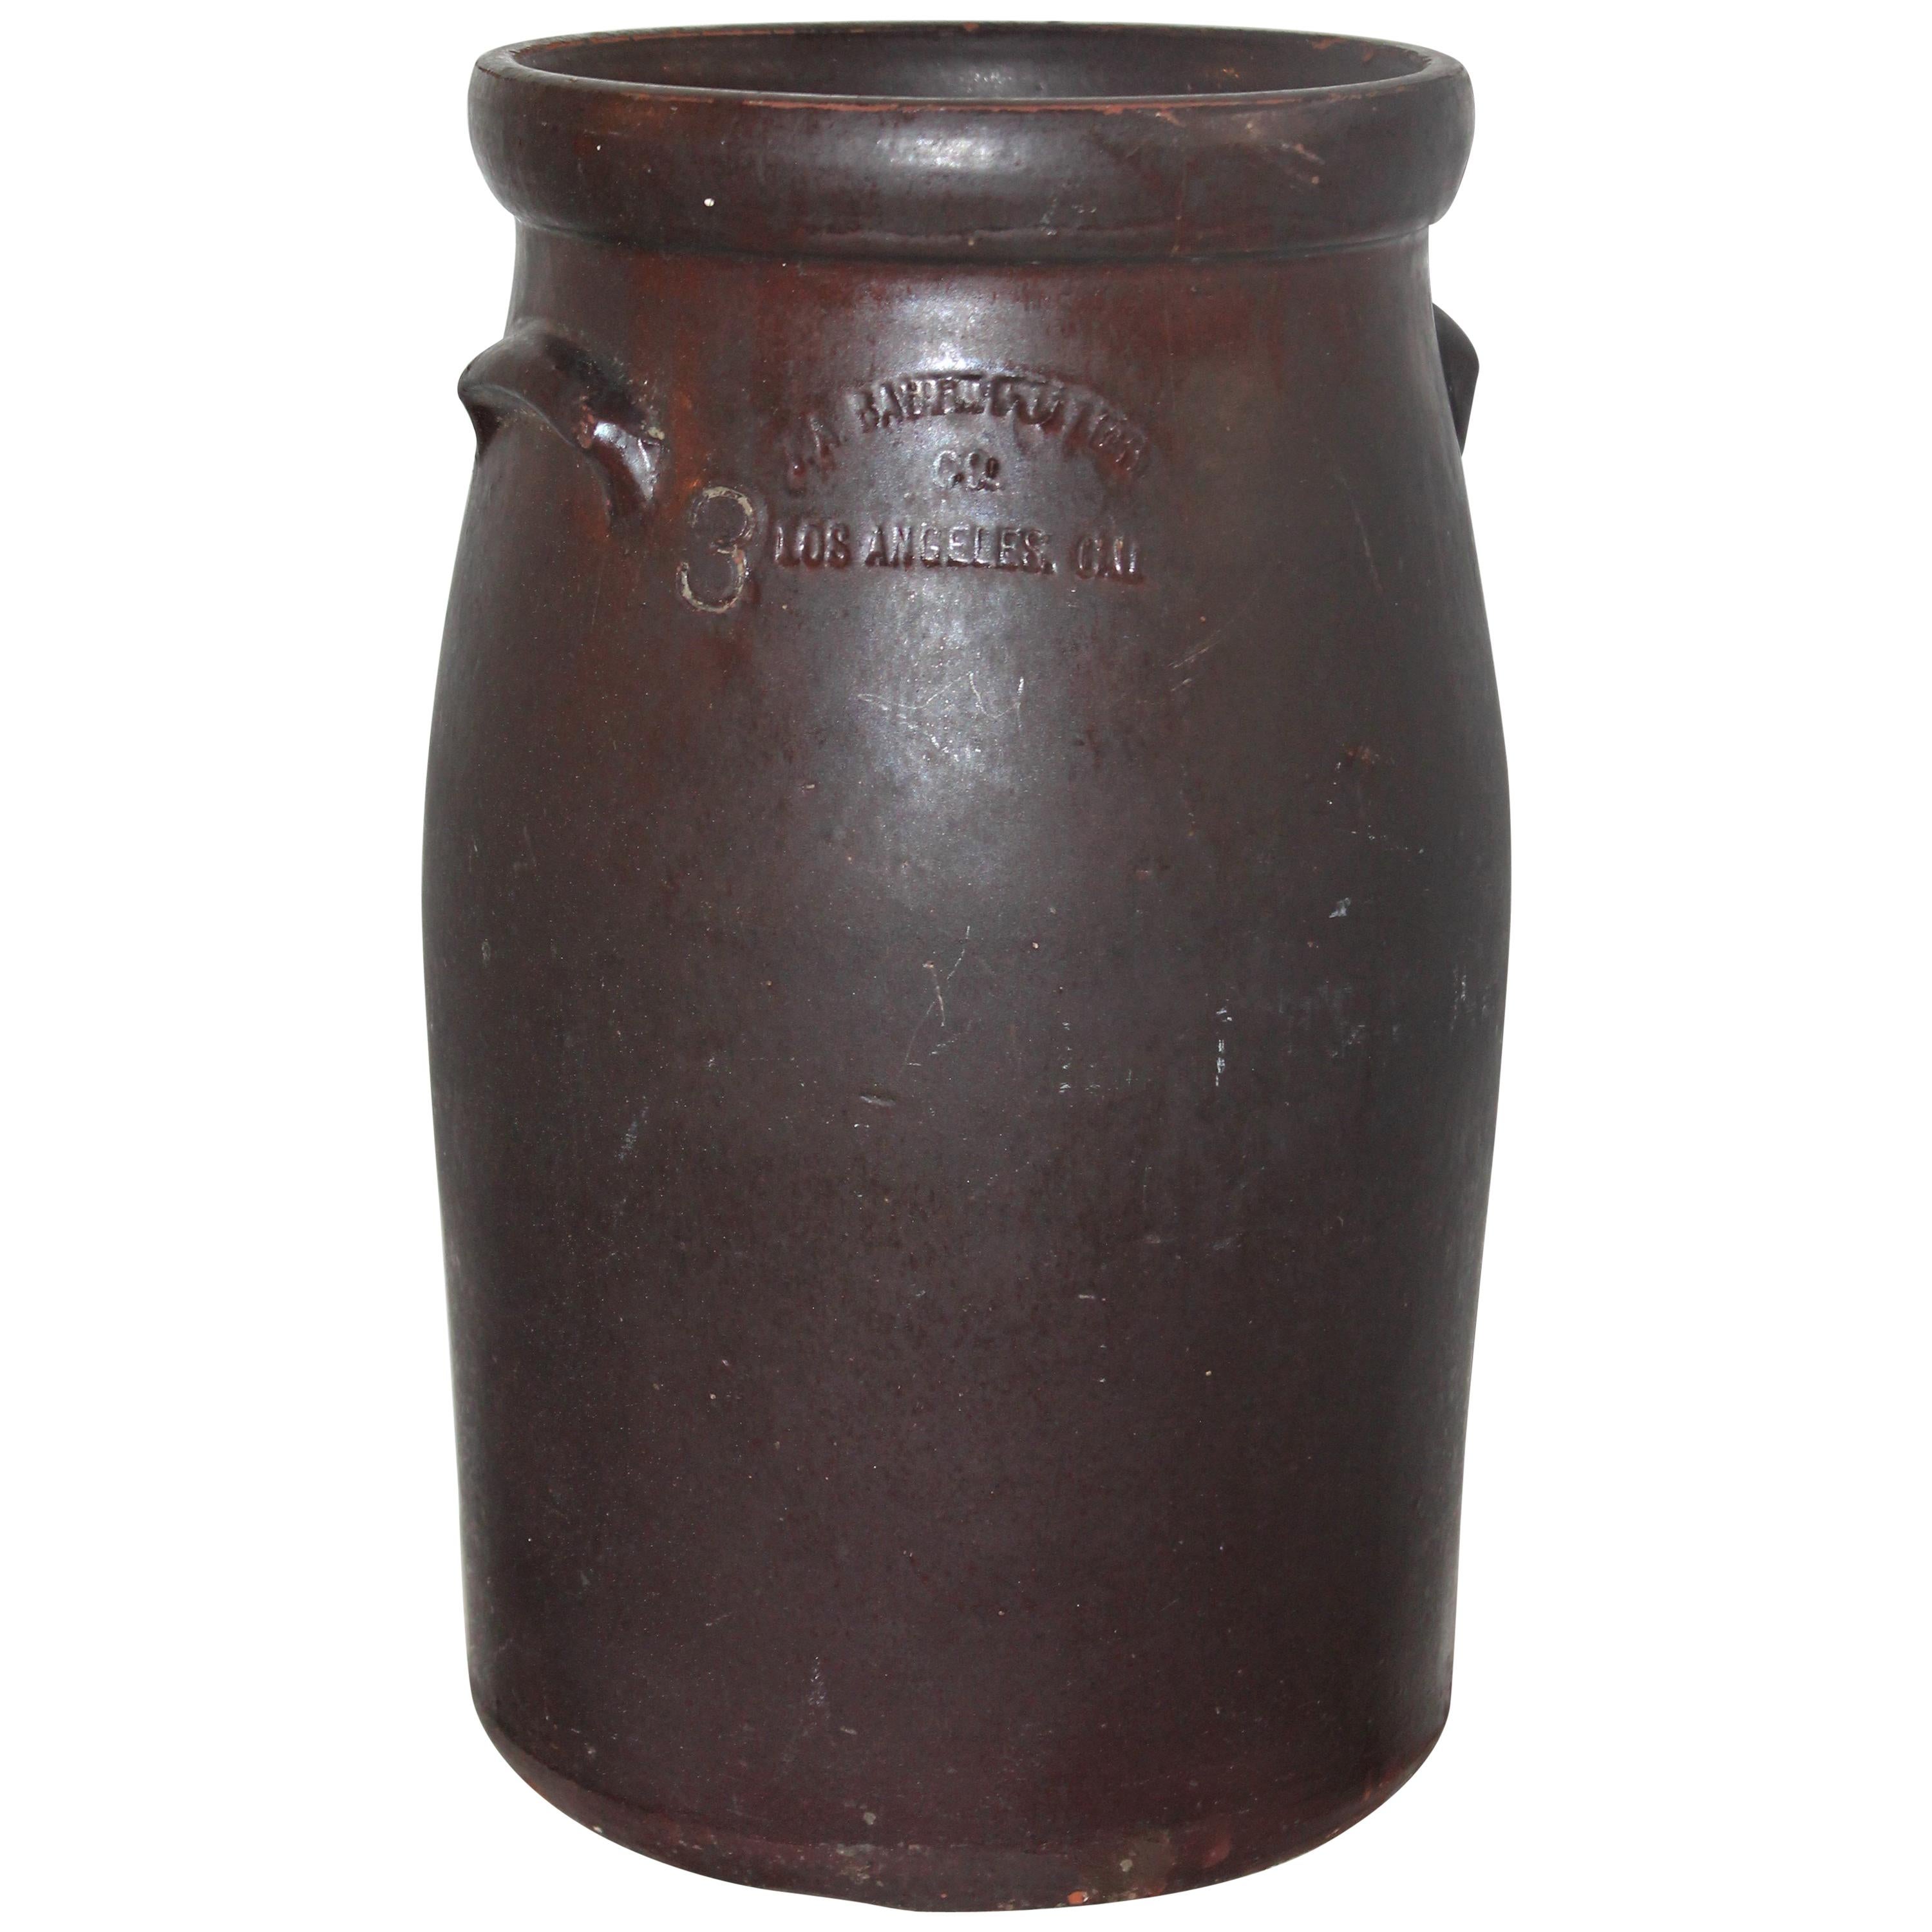 19th Century Large 3 Gal. Crock or Butter Churn Made in  Los Angeles